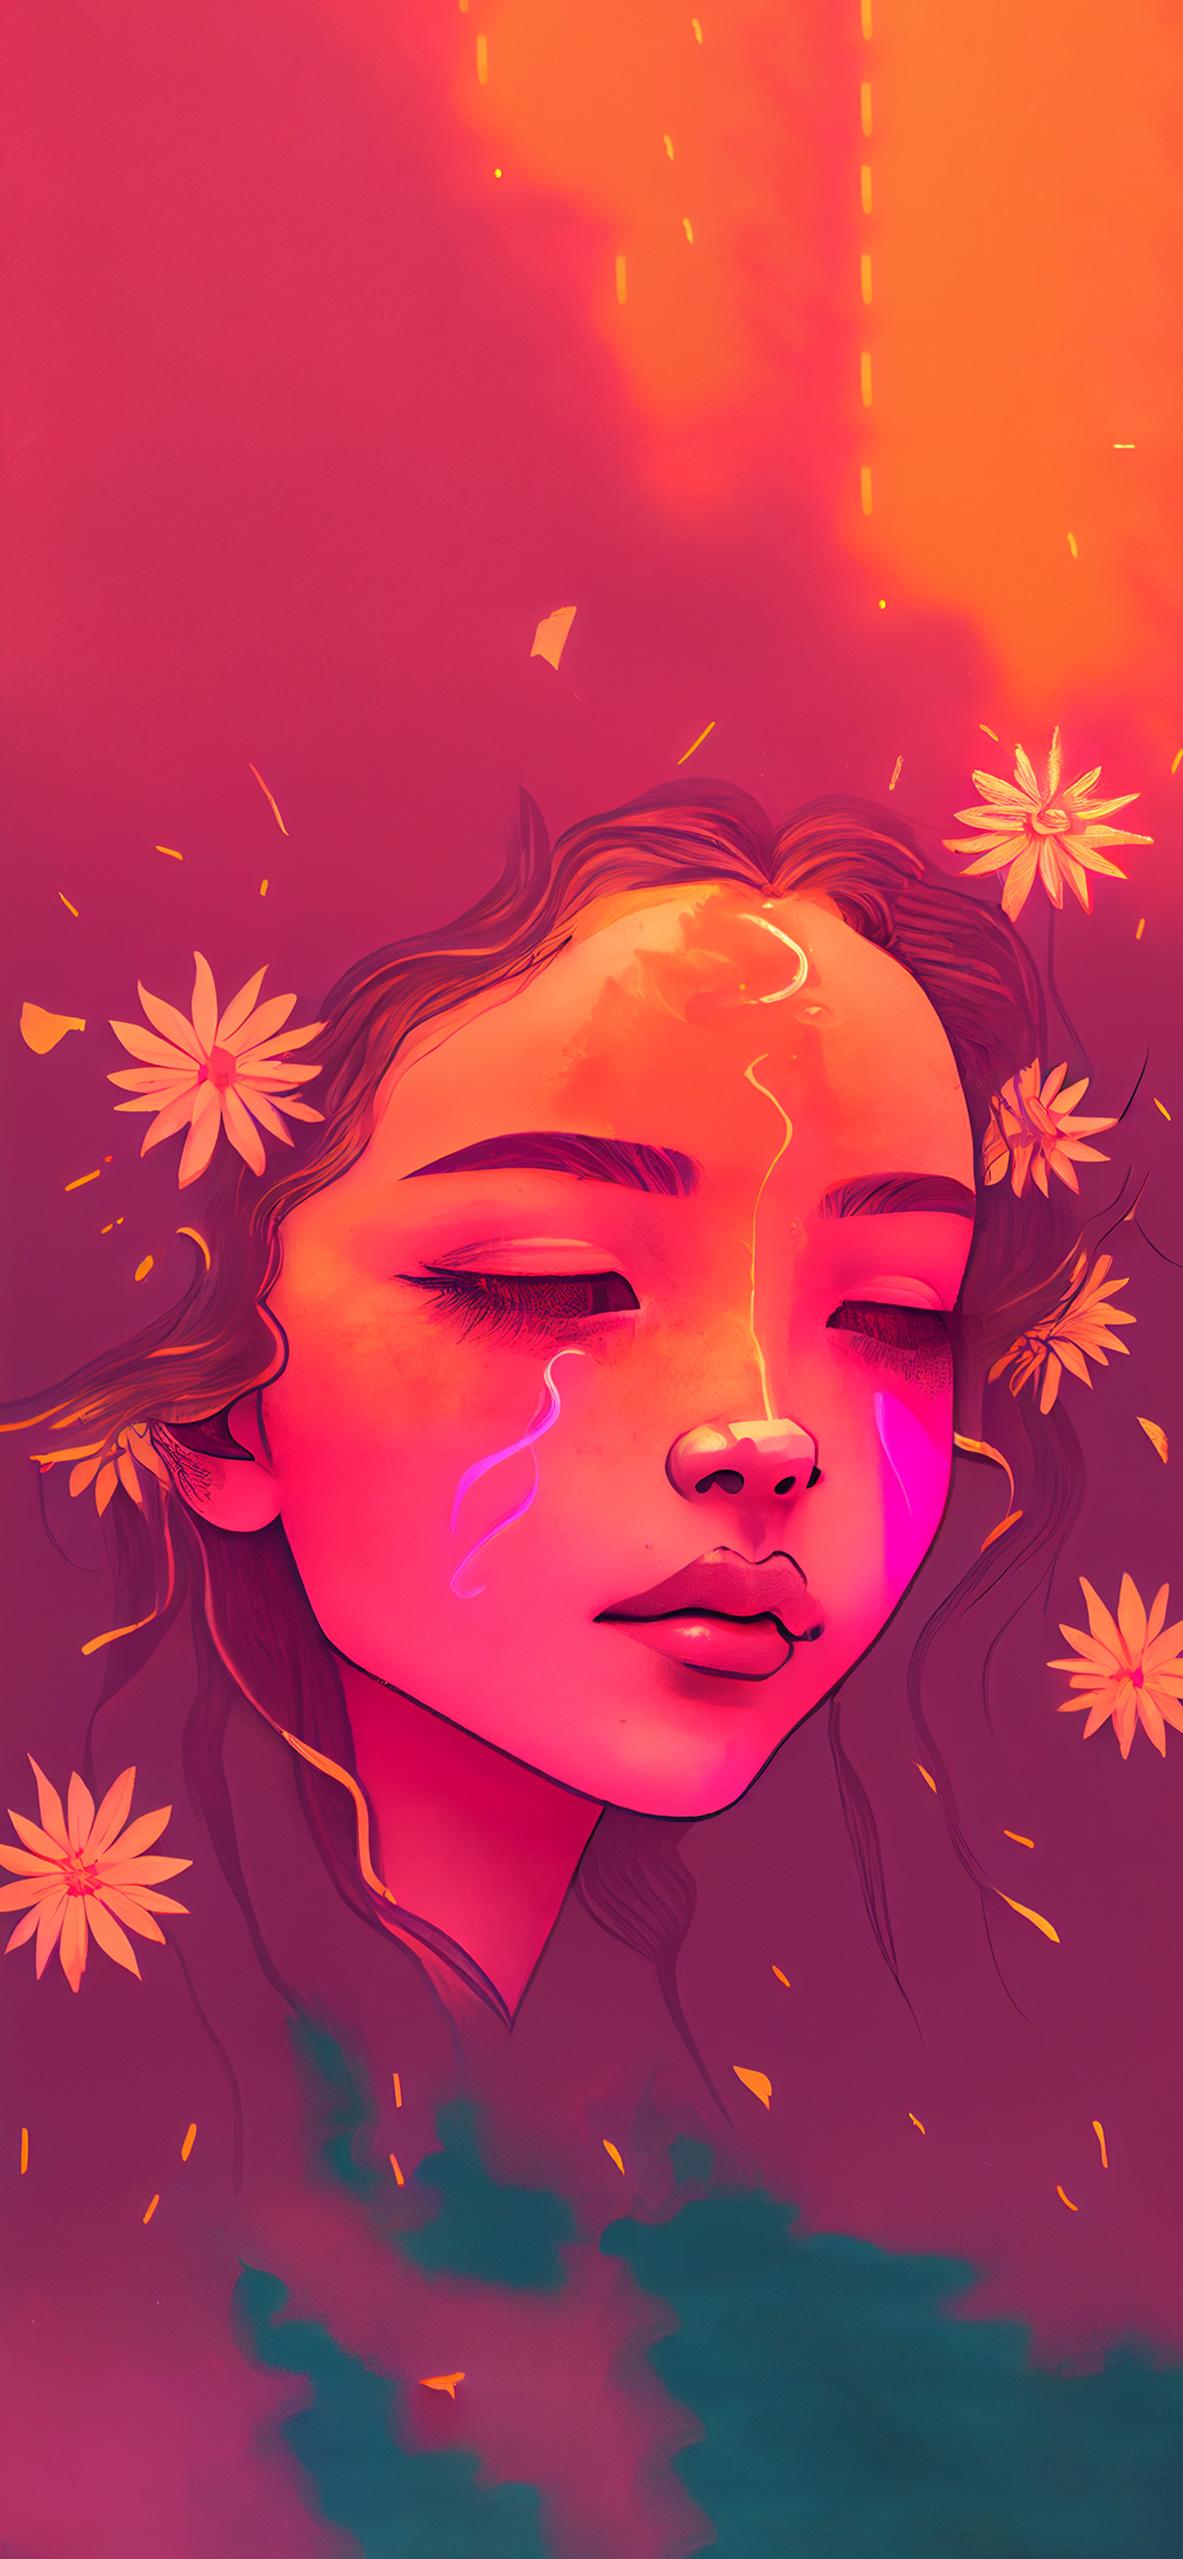 A Girl With Flowers Wallpaper Aesthetic For iPhone